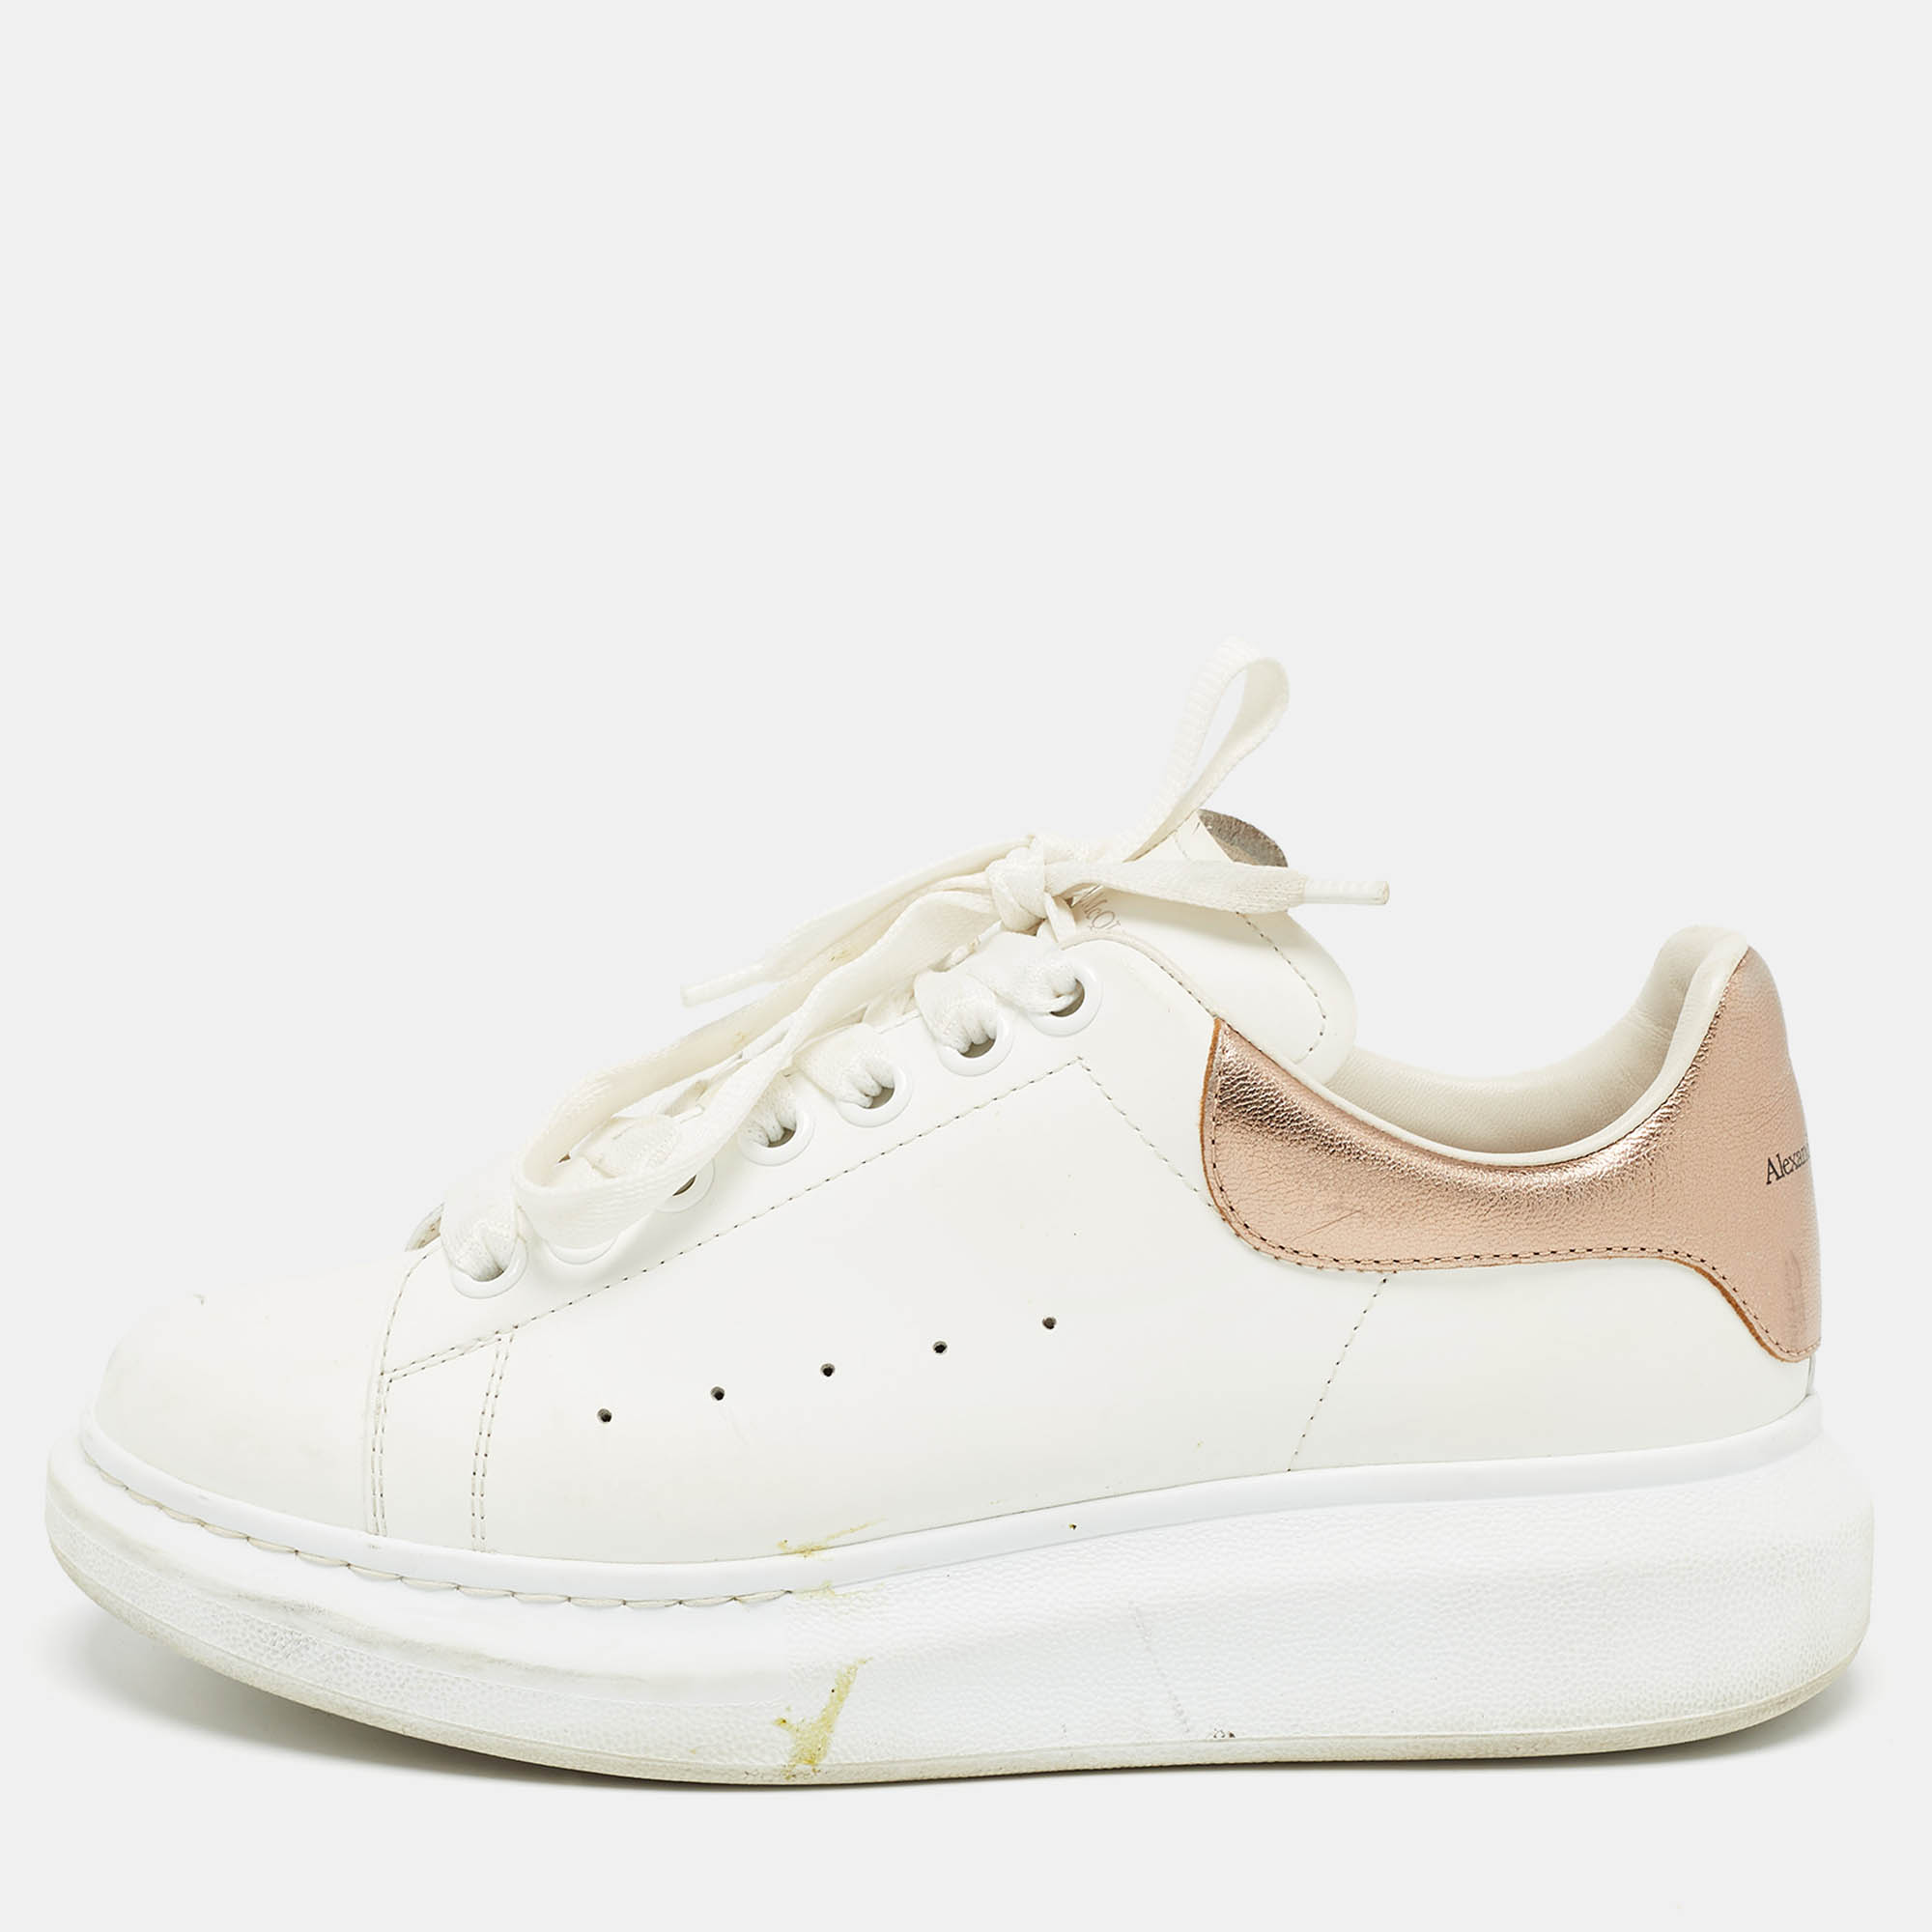 Pre-owned Alexander Mcqueen White Leather Oversized Trainers Size 38